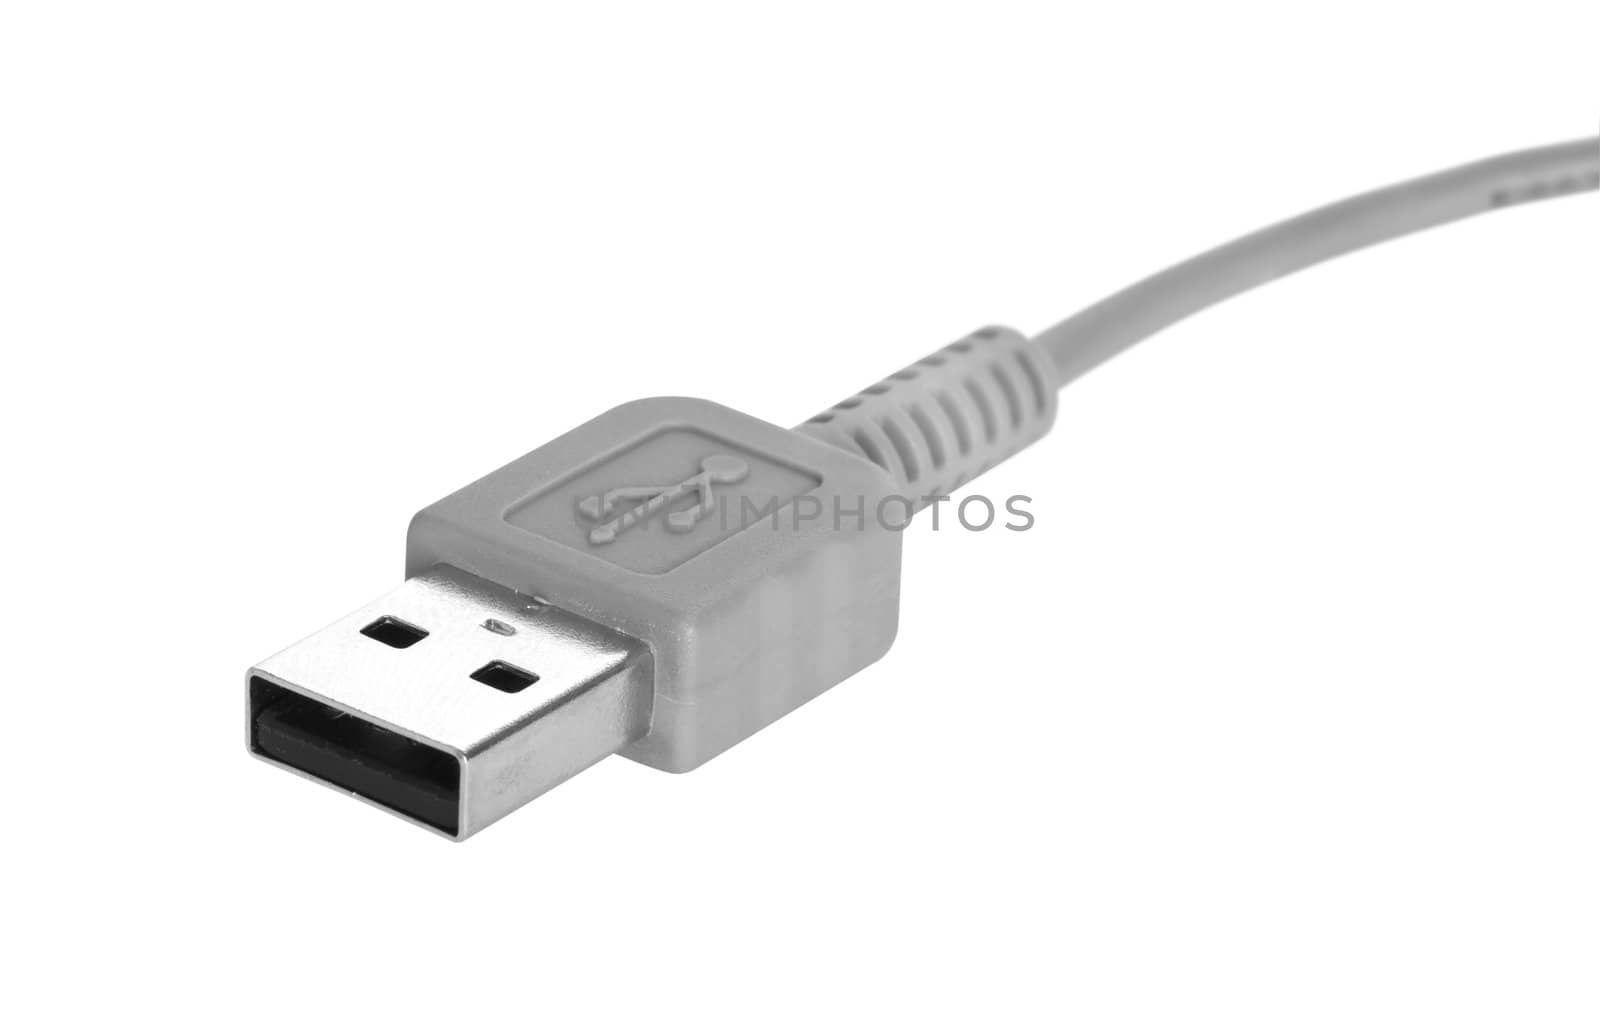 Closeup of USB Conector on White Background by tanatat